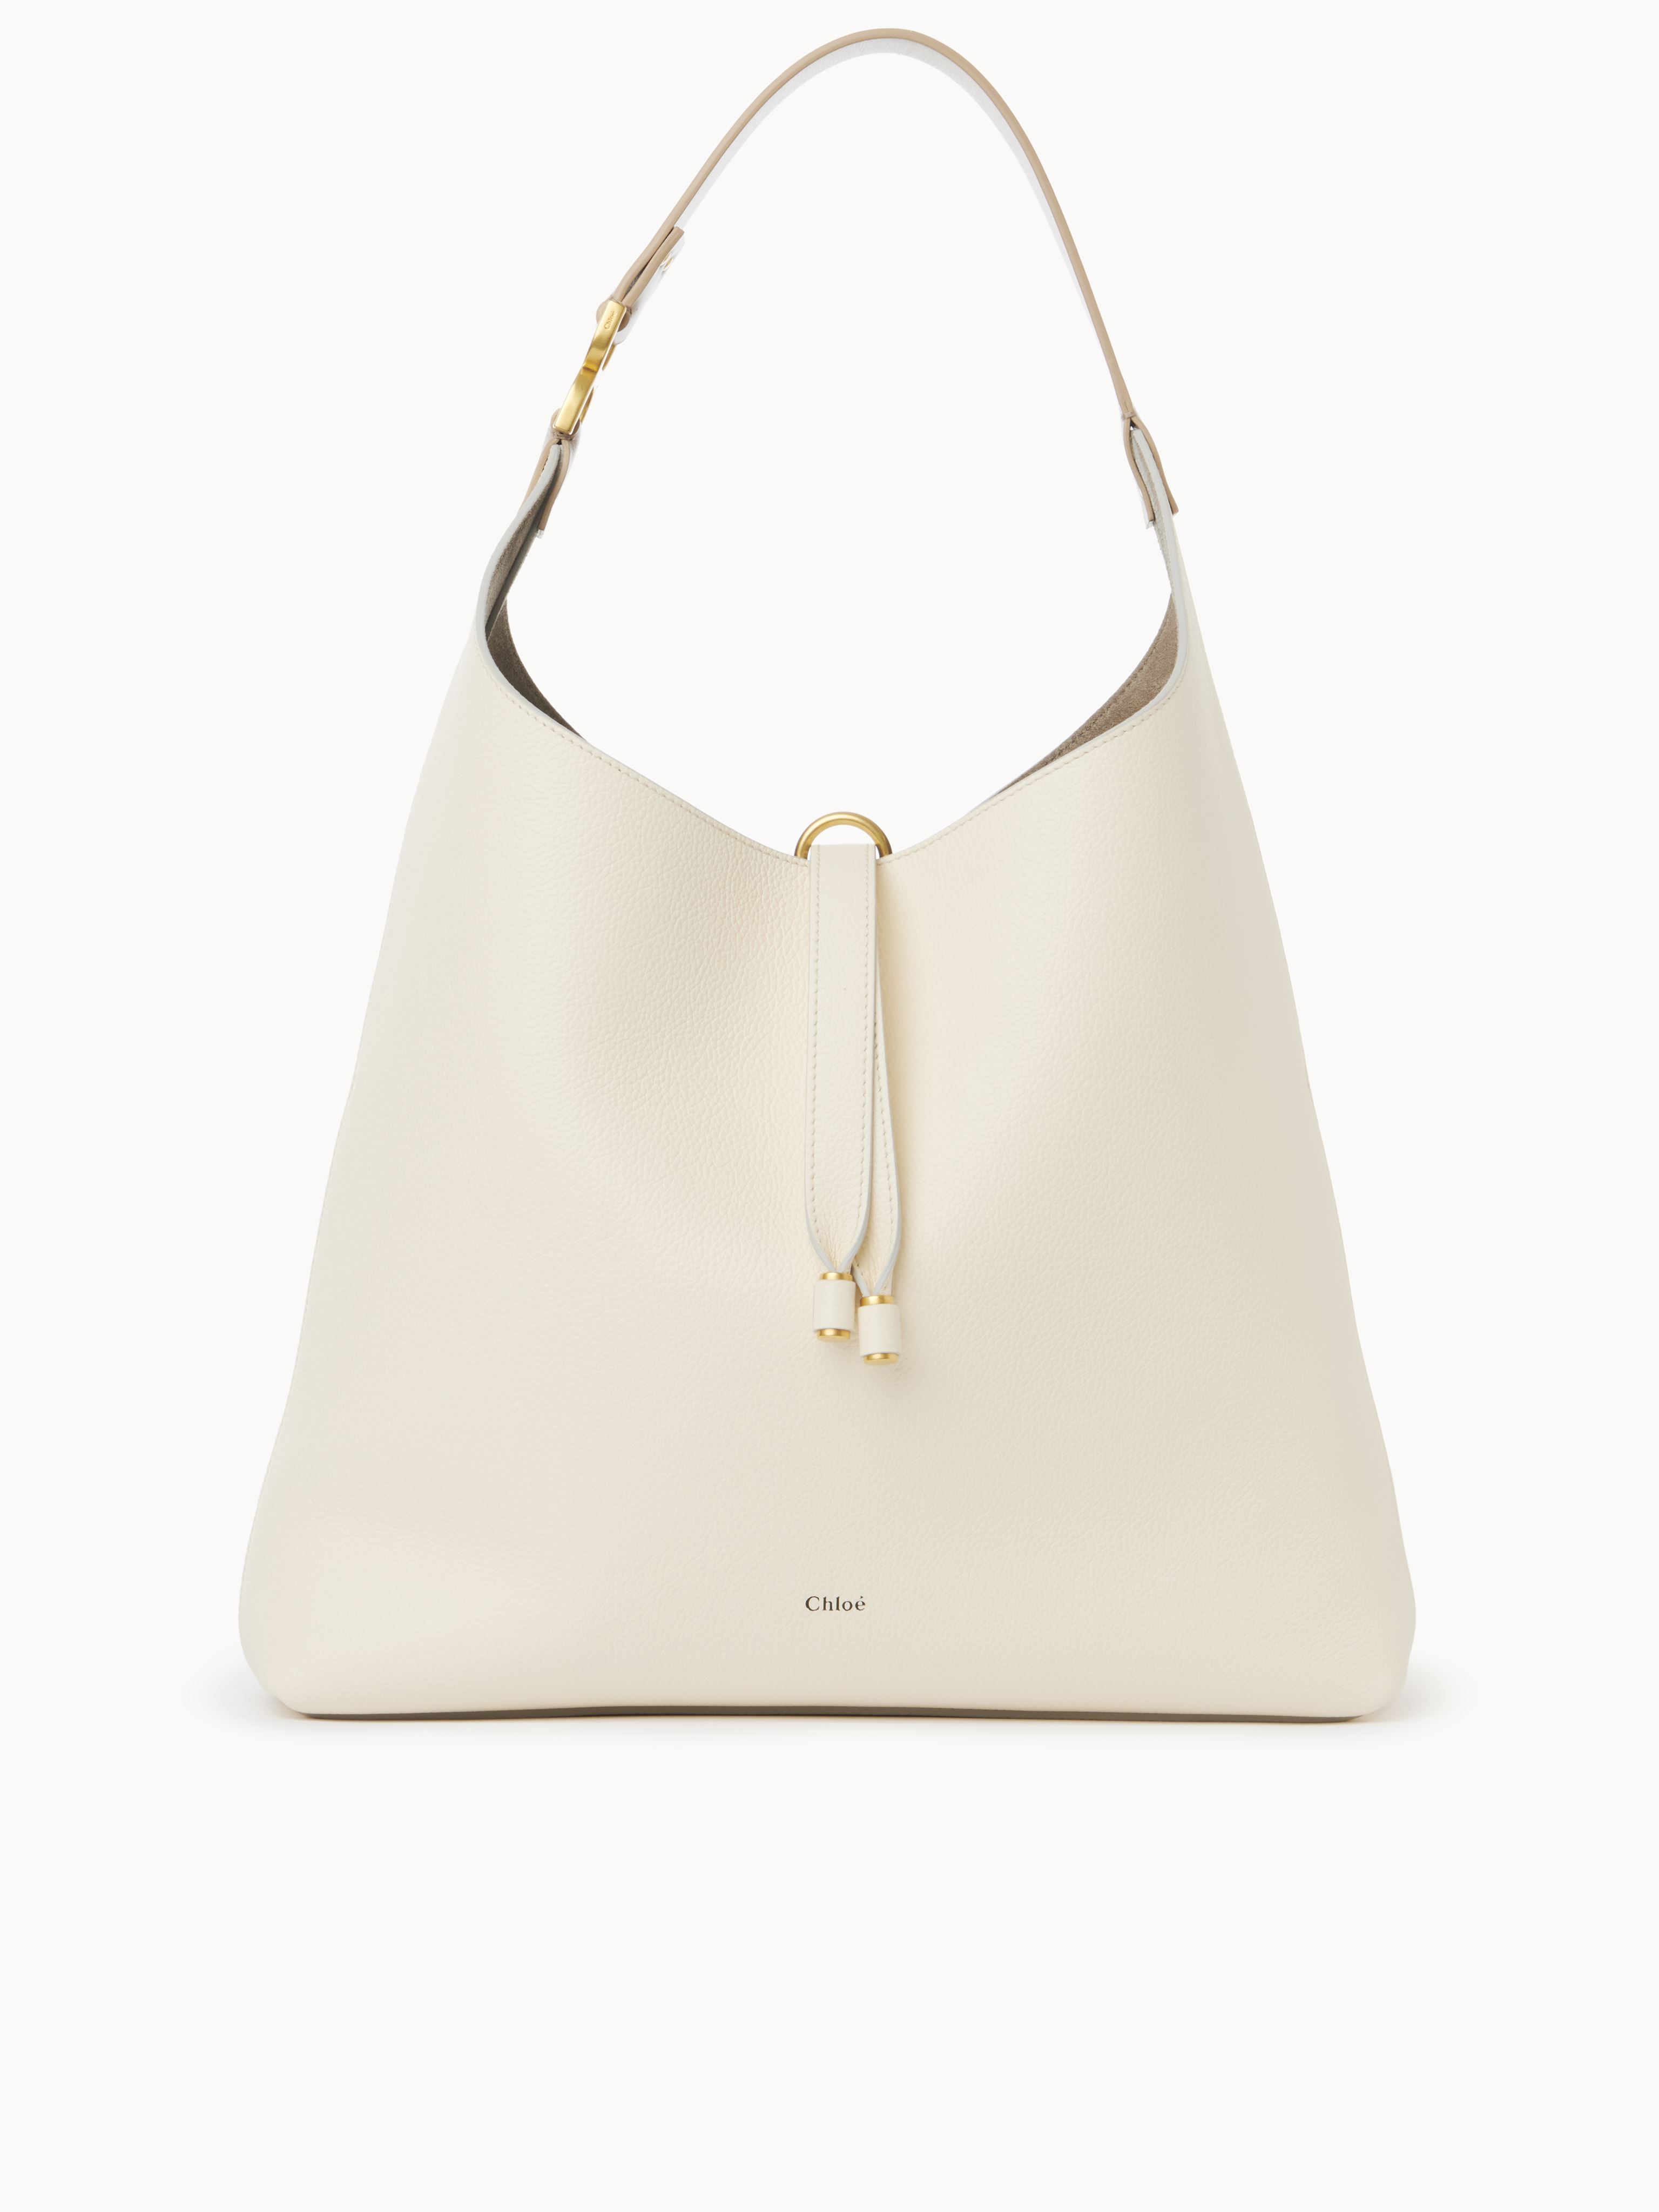 Chloé Marcie Hobo Bag In Grained Leather White Size Onesize 100% Calf-skin Leather